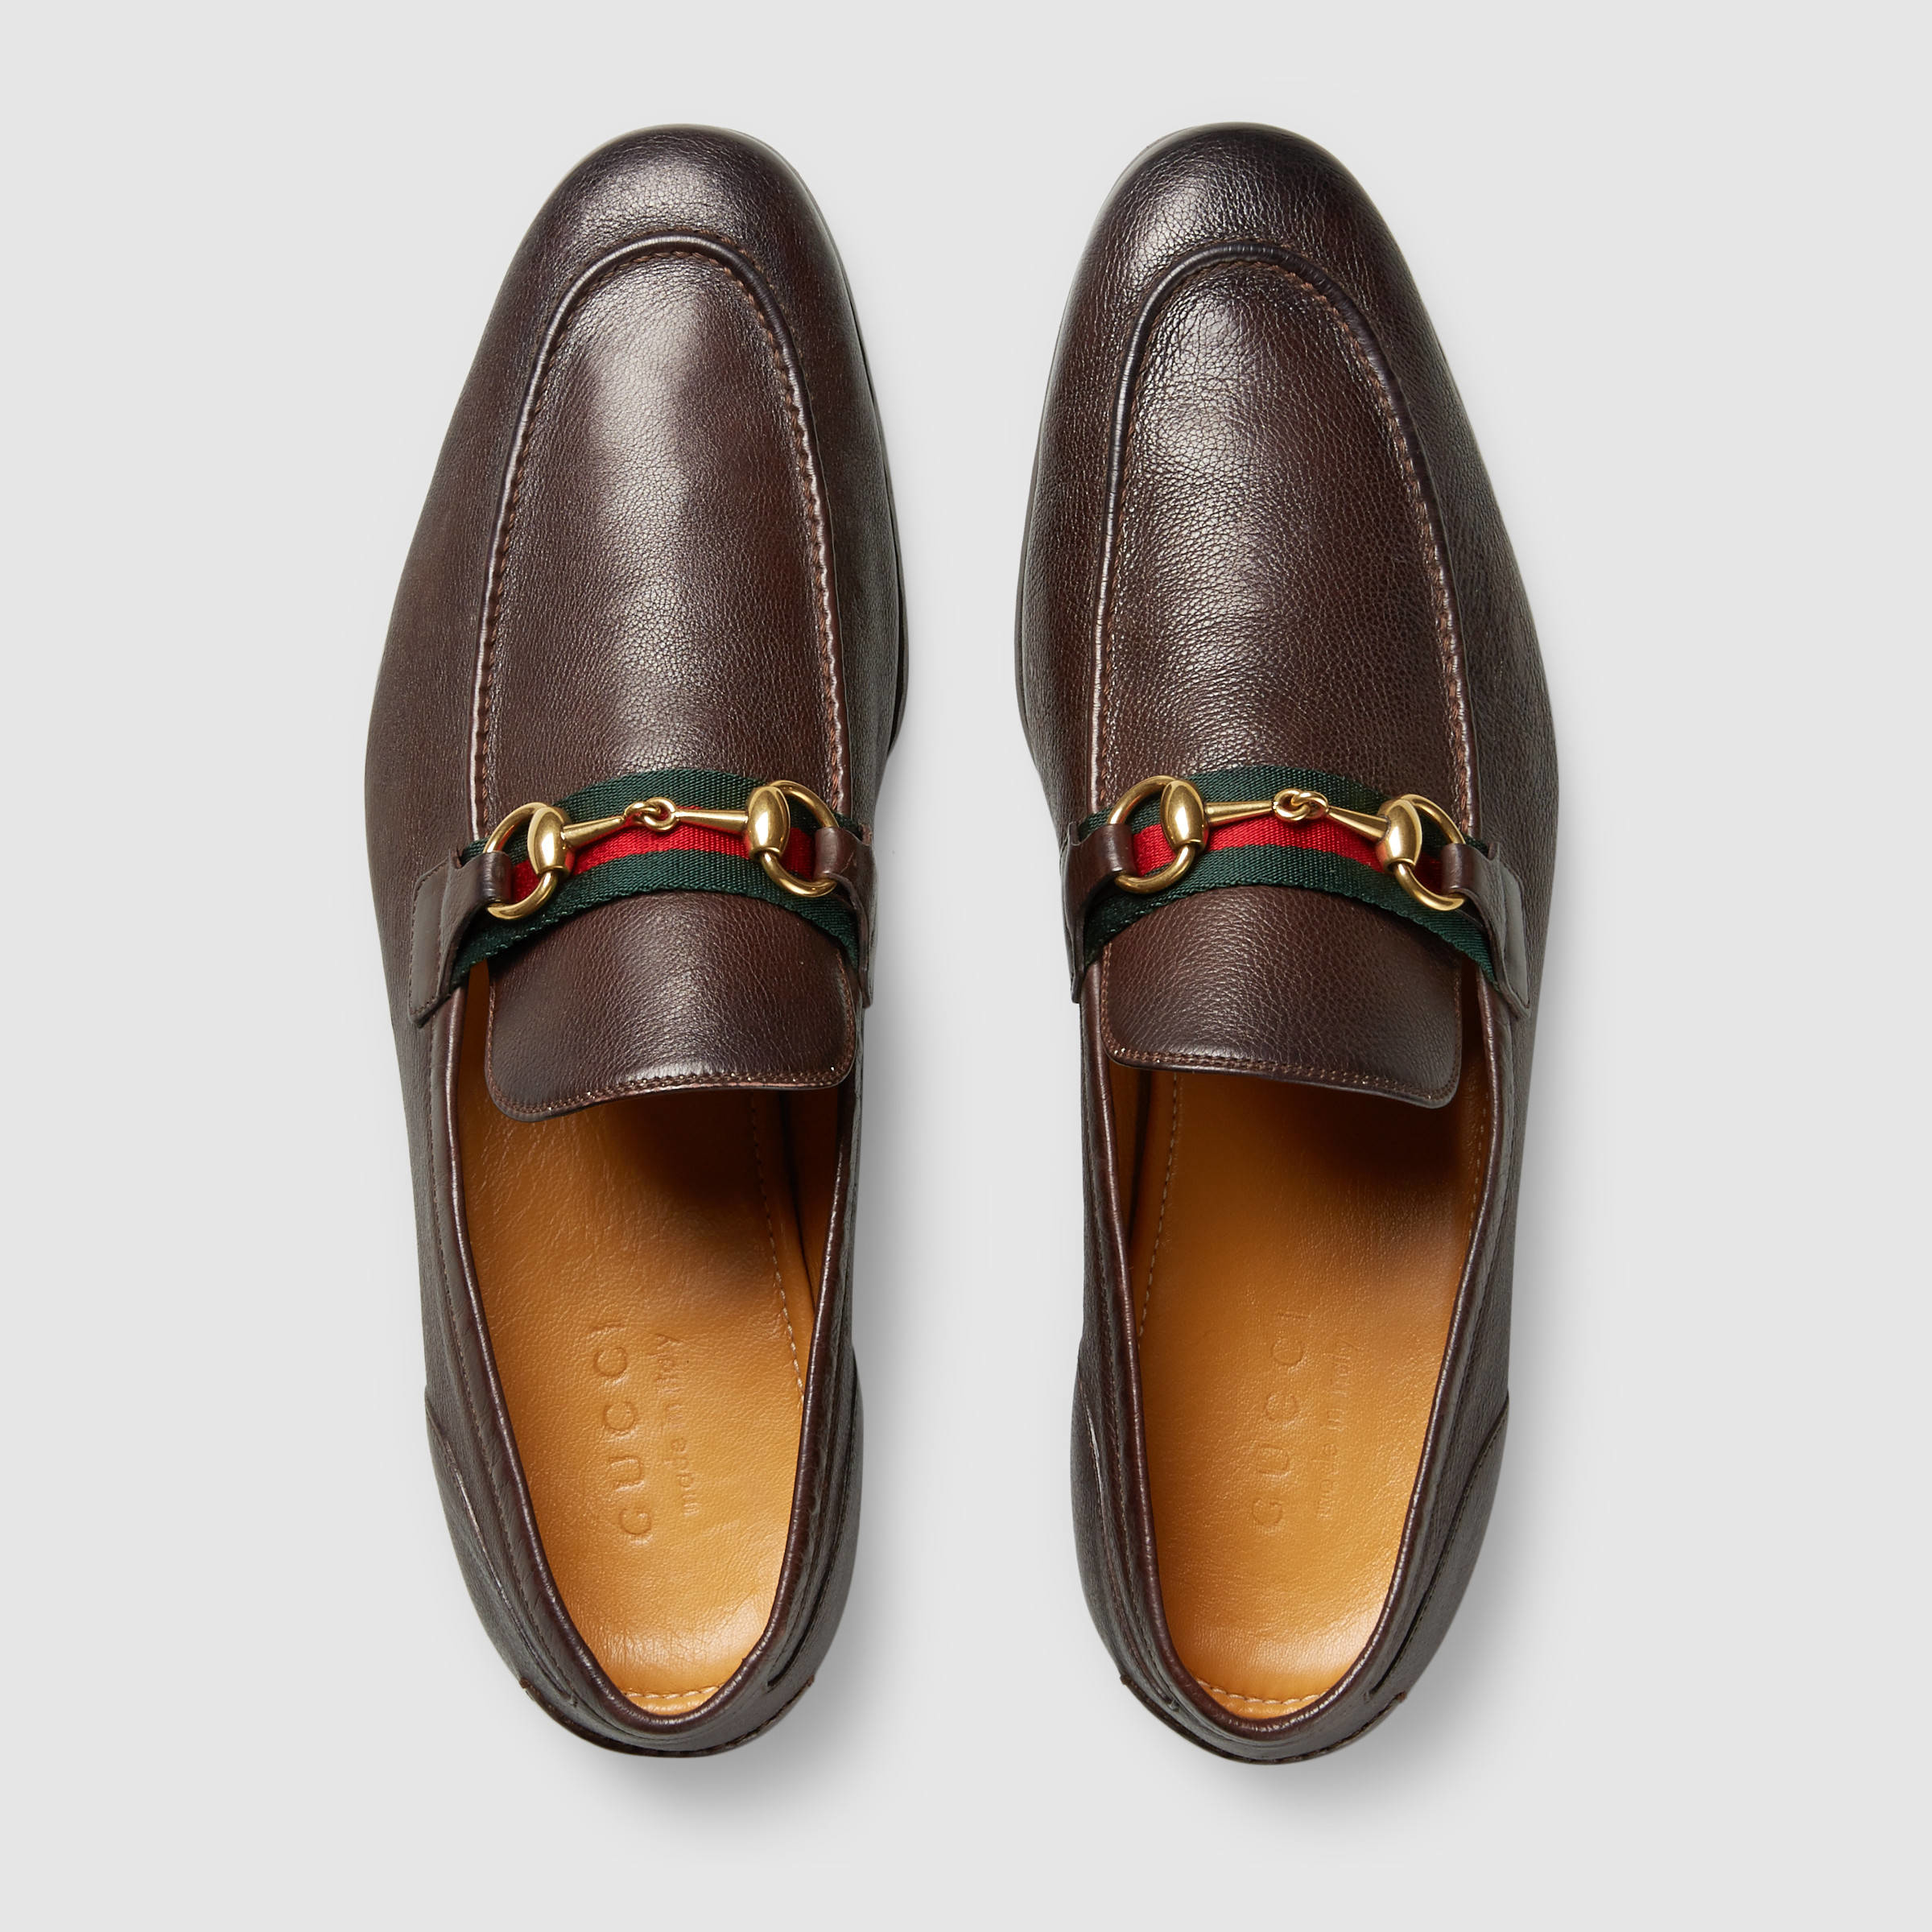 Lyst - Gucci Horsebit Leather Loafer With Web in Brown for Men